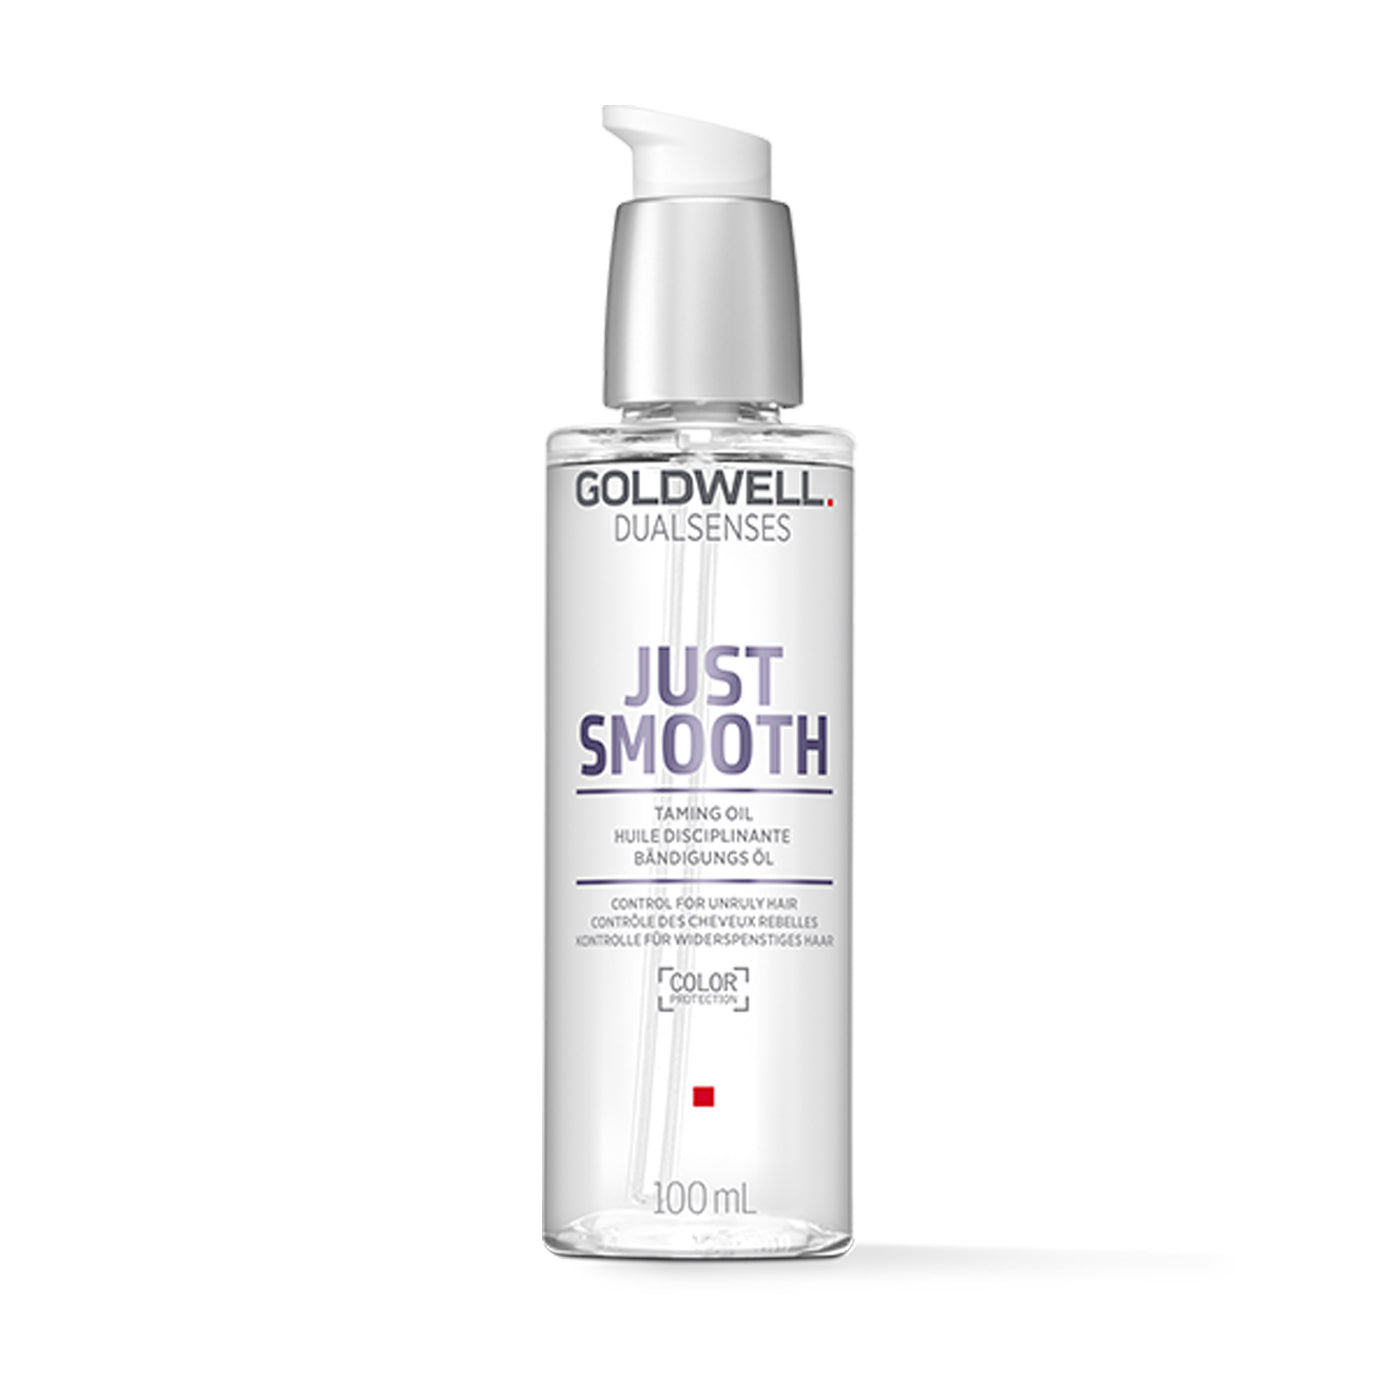 Goldwell DualSenses Just Smooth Taming Oil (100ml) - Ultimate Hair and Beauty